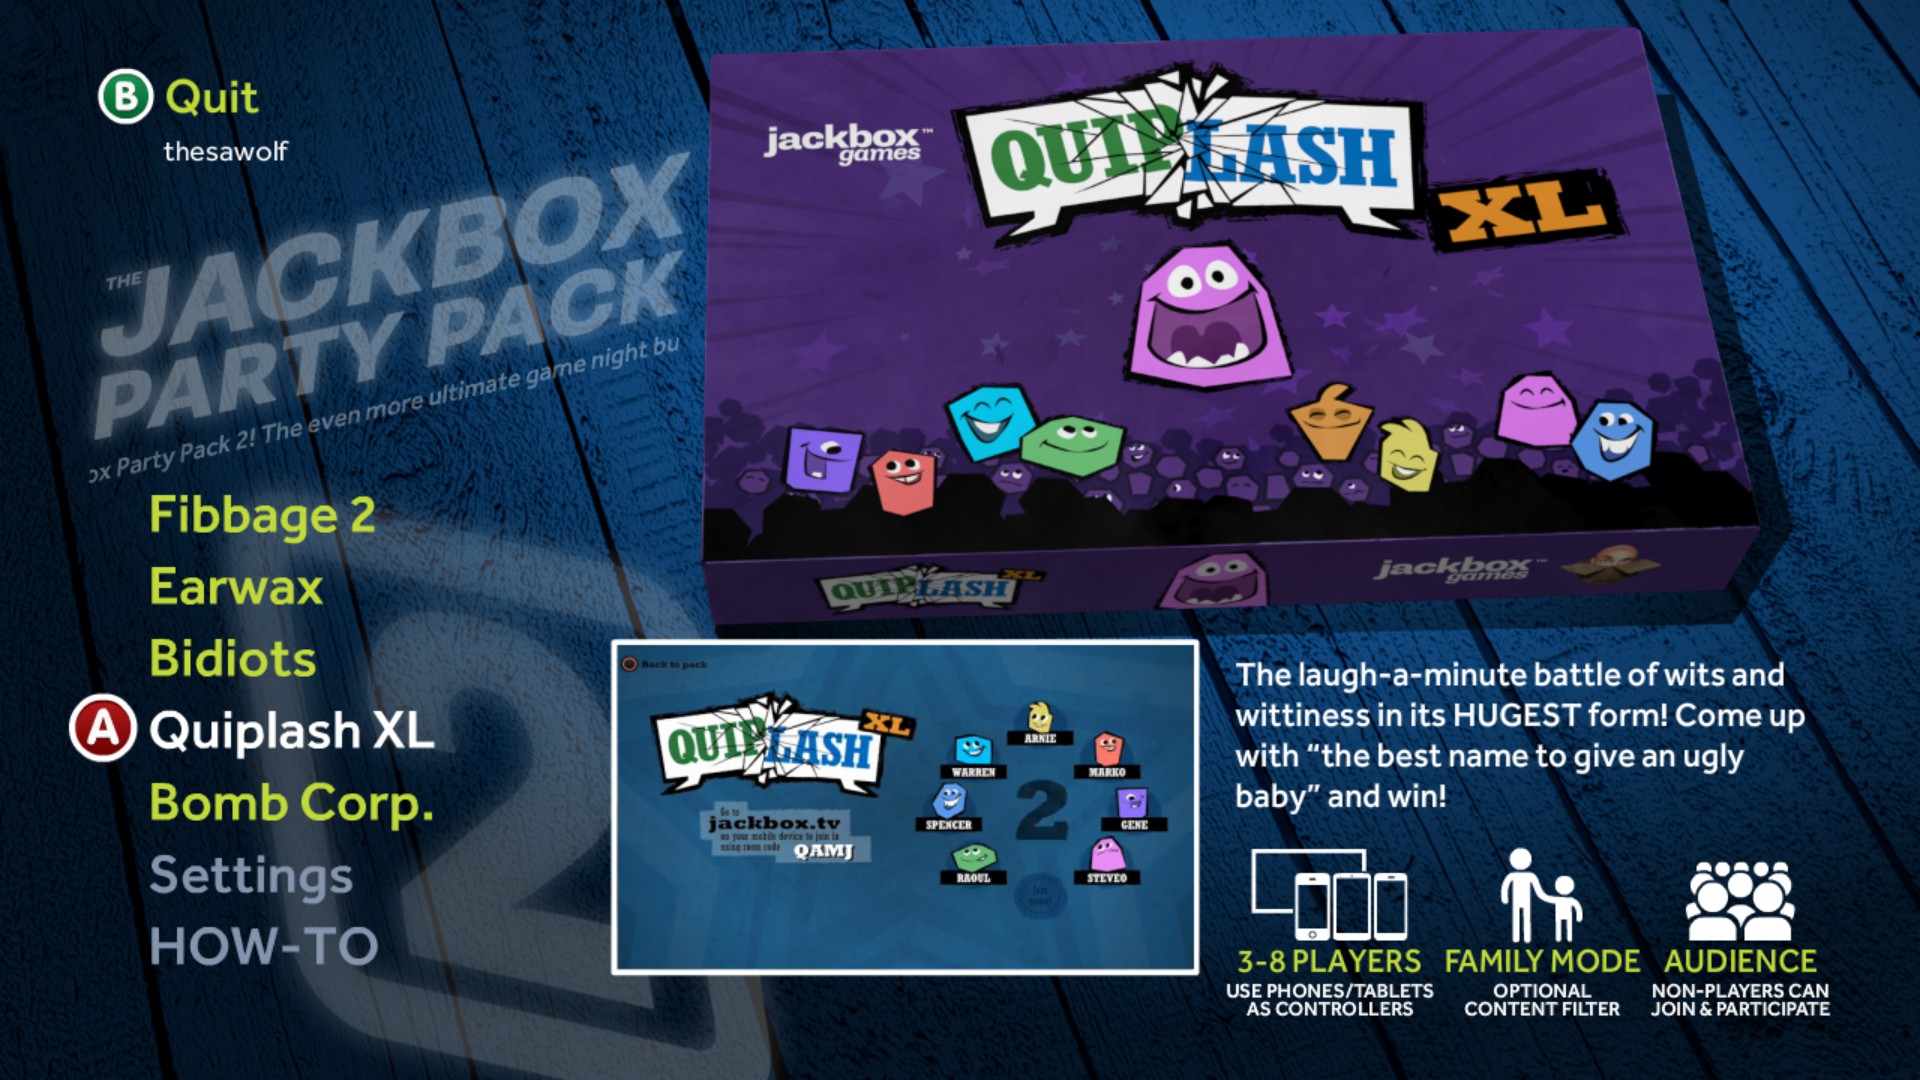 earwax the jackbox party pack 2 soundtrack